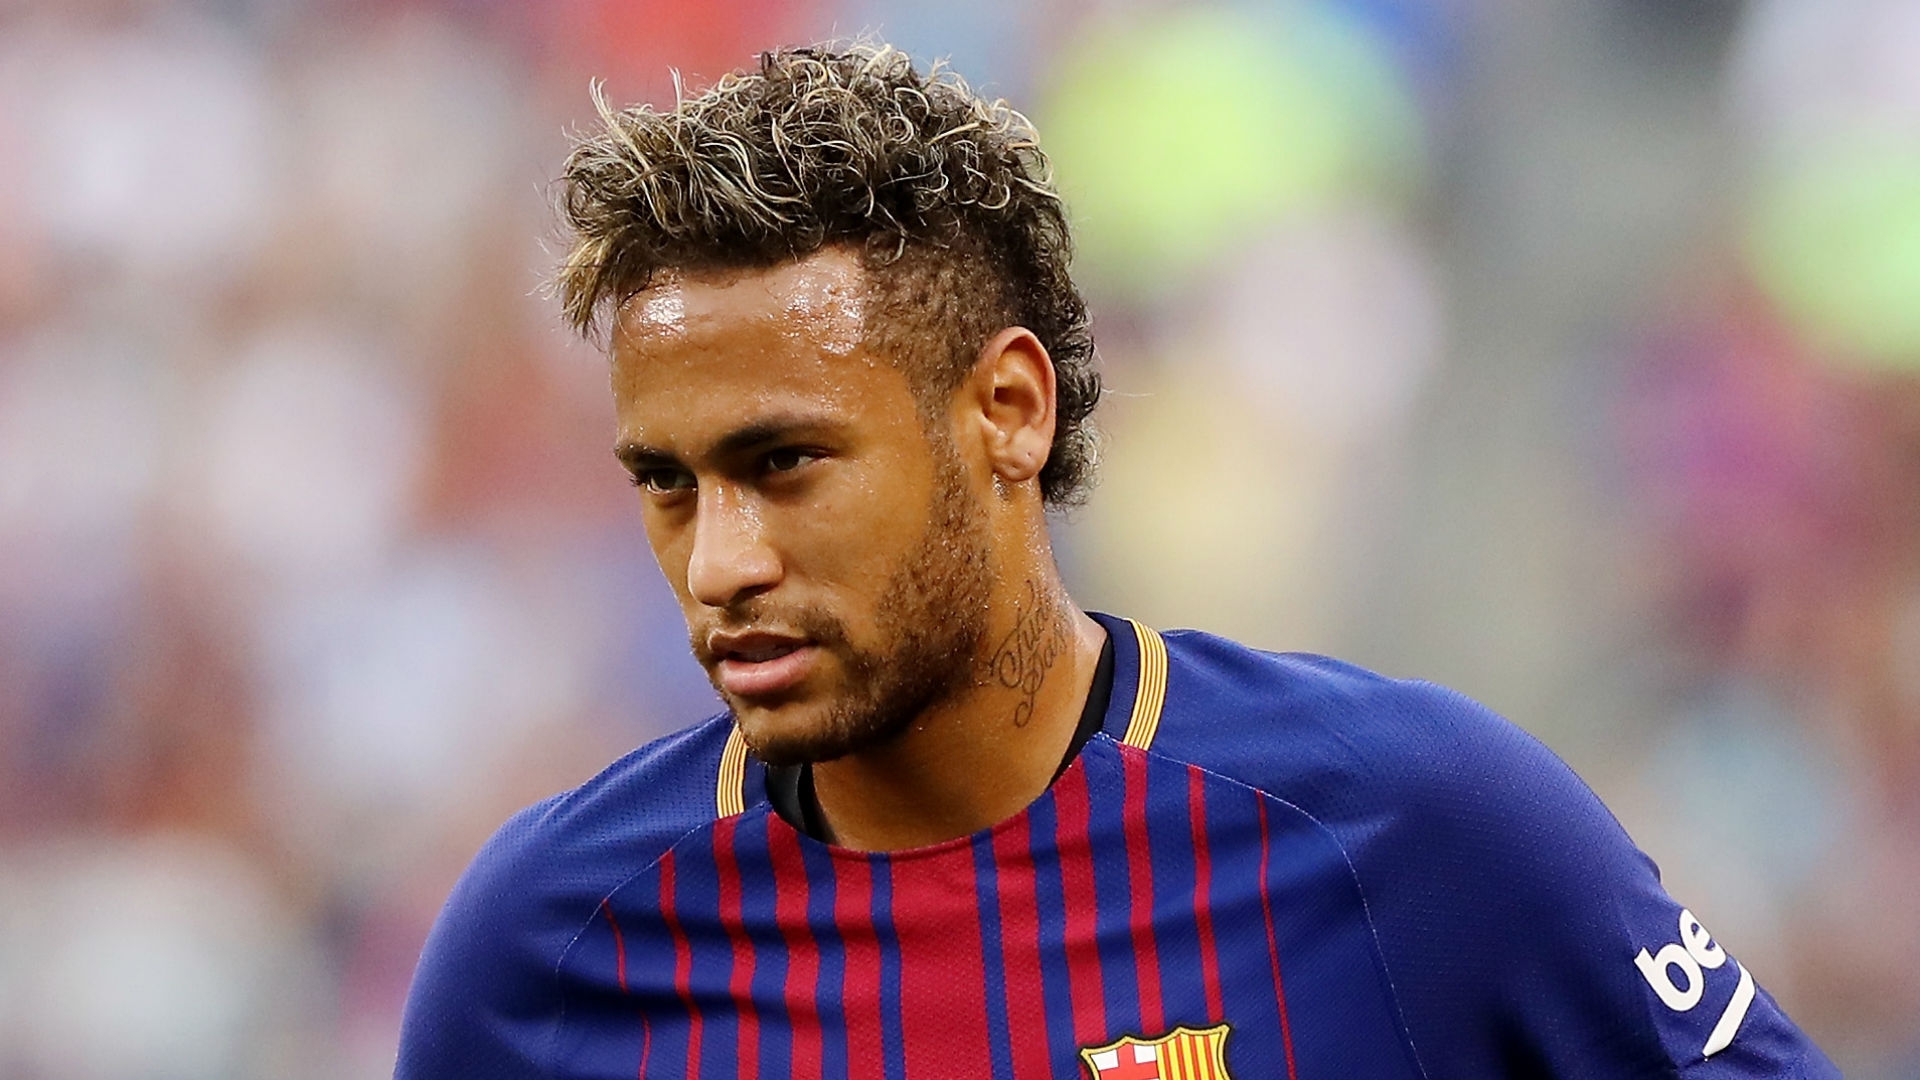 Hoeness' comments are seen to address directly the rumor the Brazilian forward Neymar could be moving from Barcelona to PSG, for the frankly outrageous, sum of €222million.